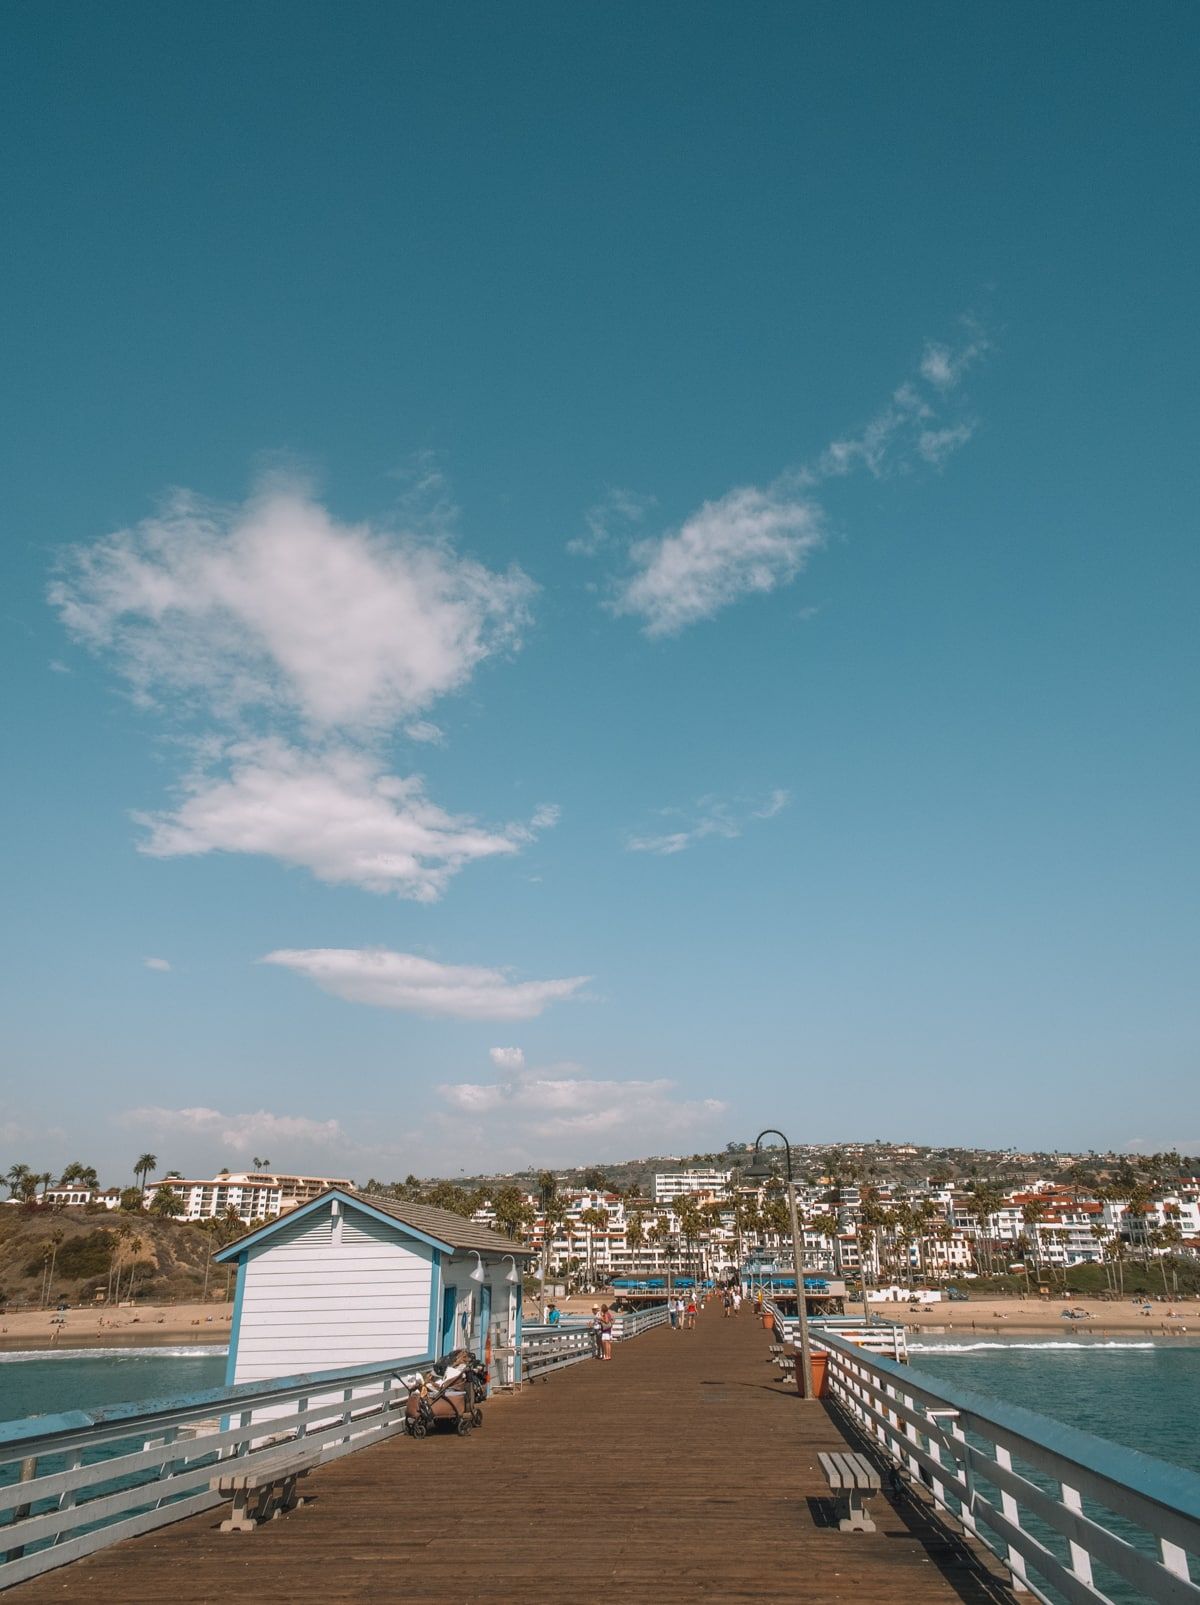 One of the best things to do in Orange County is go to the beach--shown here from the end of a long pier, with white condos dotting the hillside and a sunny sky above.